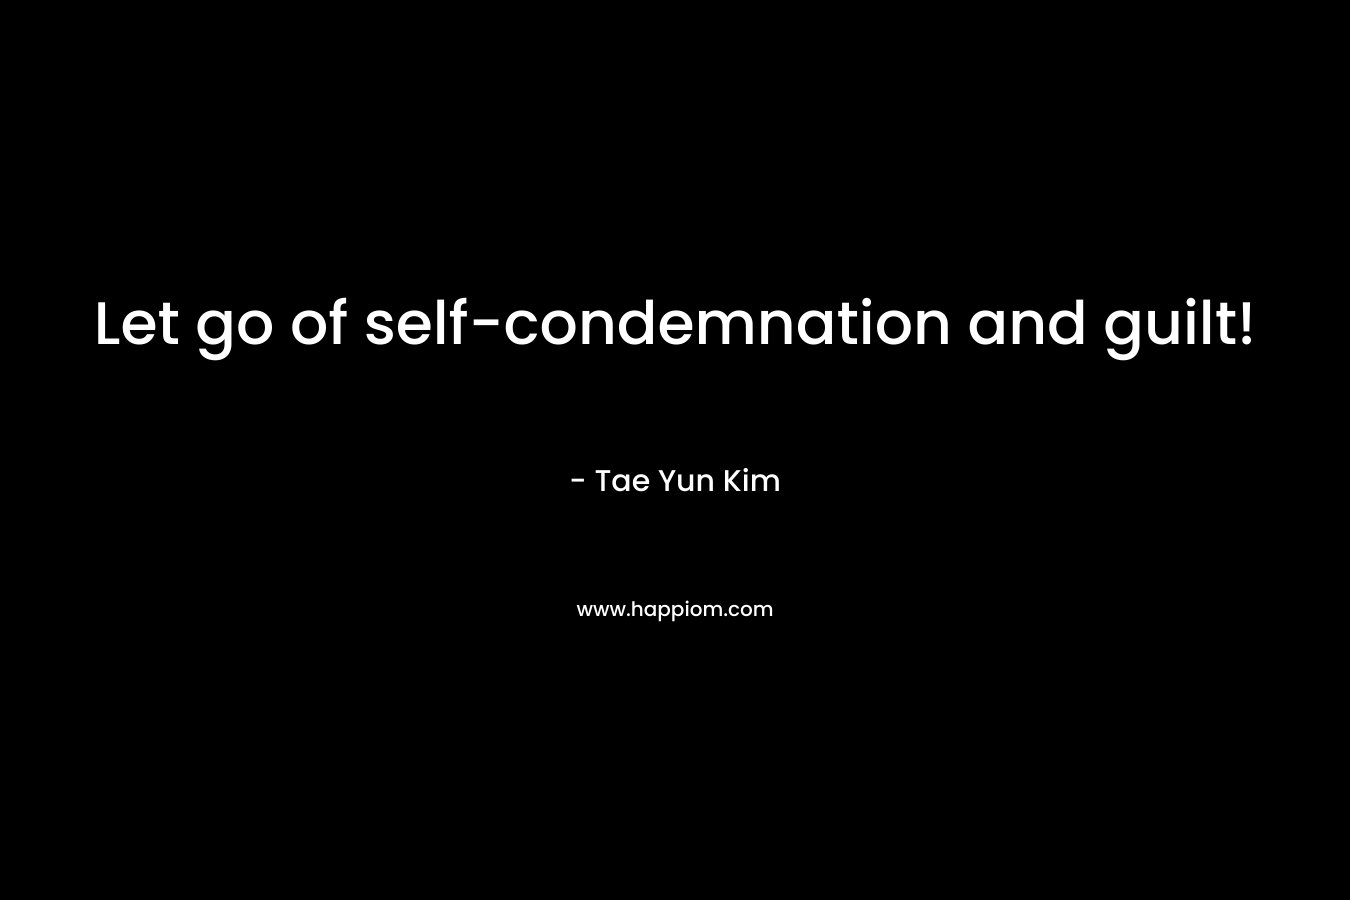 Let go of self-condemnation and guilt!